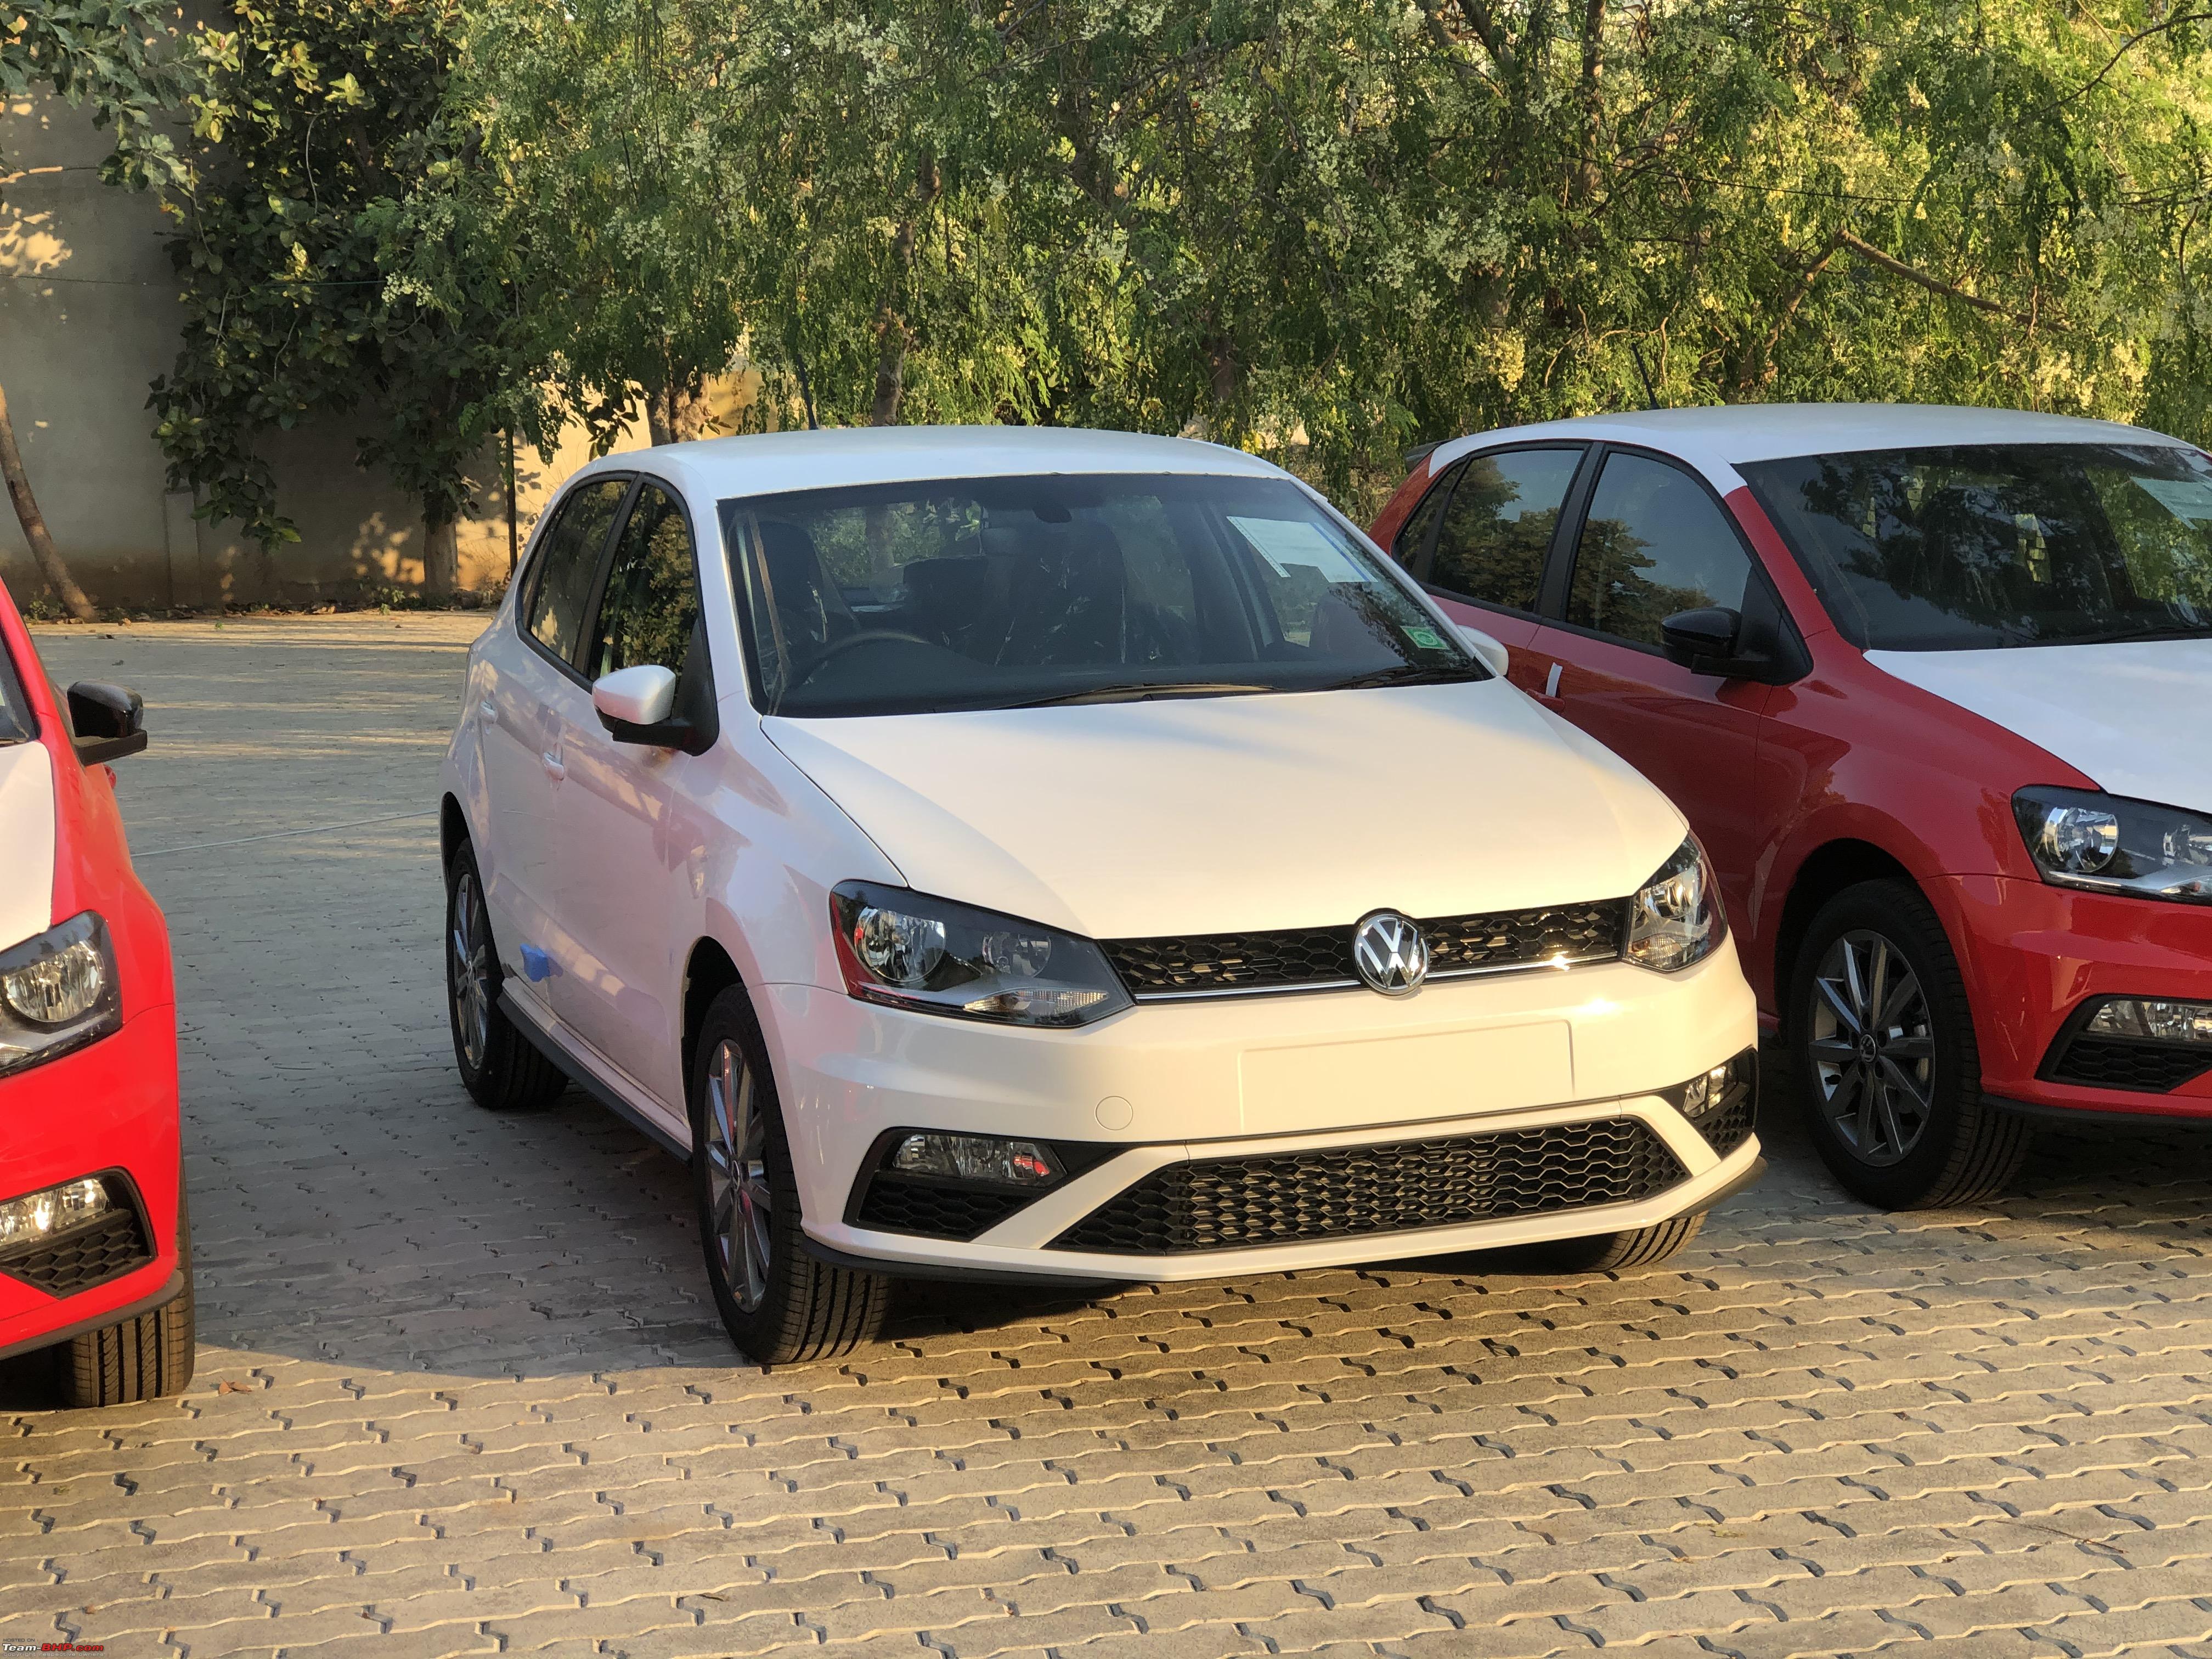 2020 Volkswagen Polo 1.0 TSI Highline Plus MT Ownership Review - Team-BHP